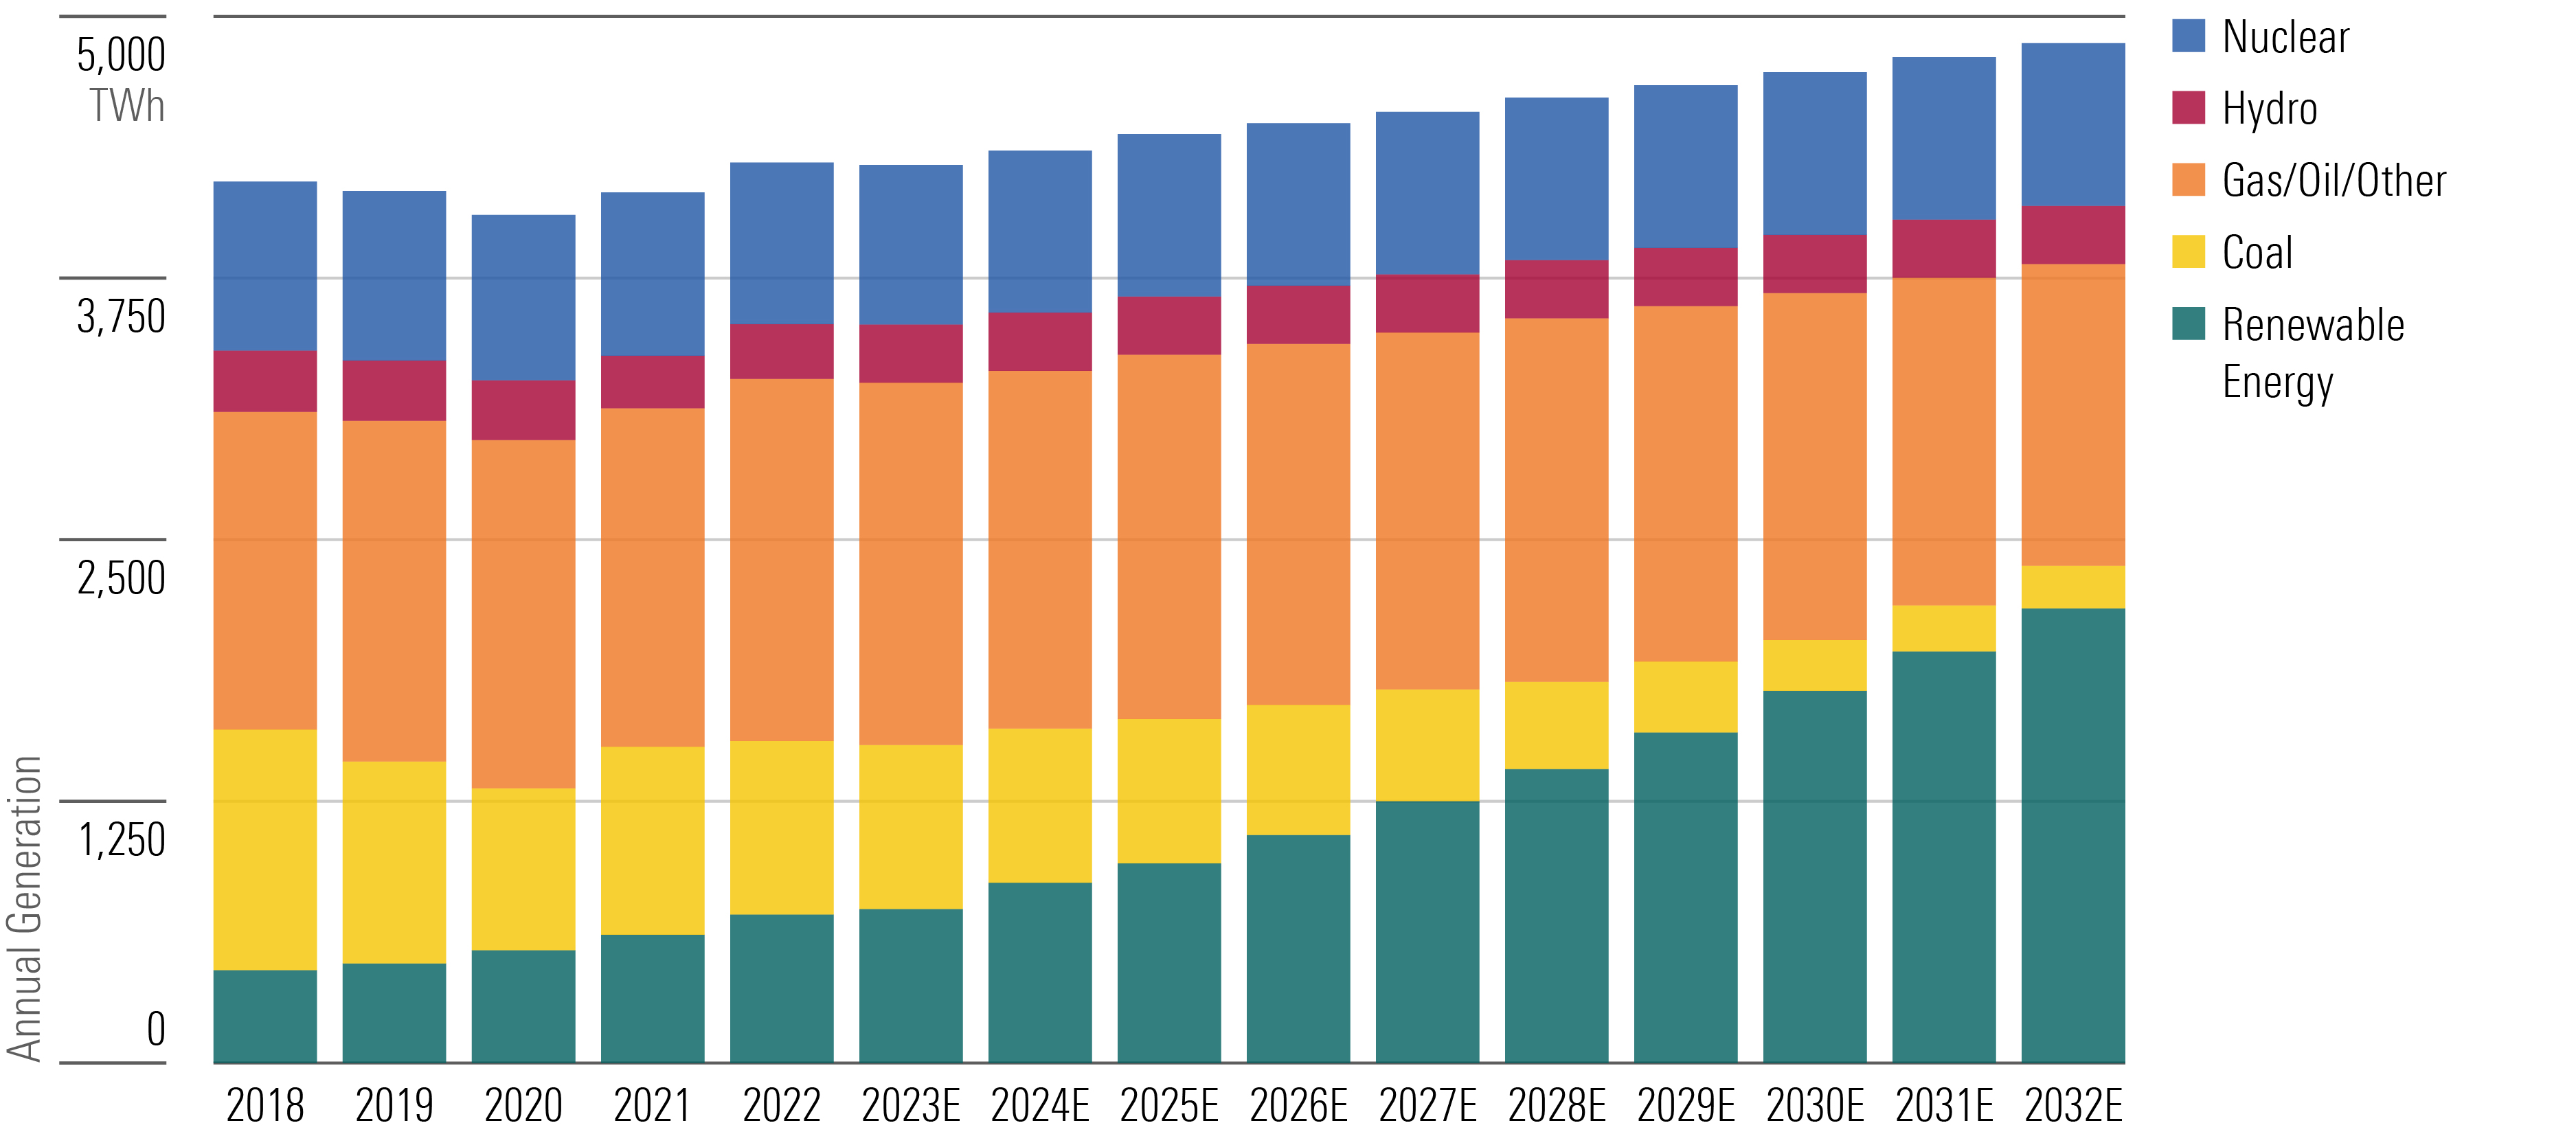 Renewable Energy (Green) Mostly Takes Market Share From Coal (Yellow) During the Next Decade